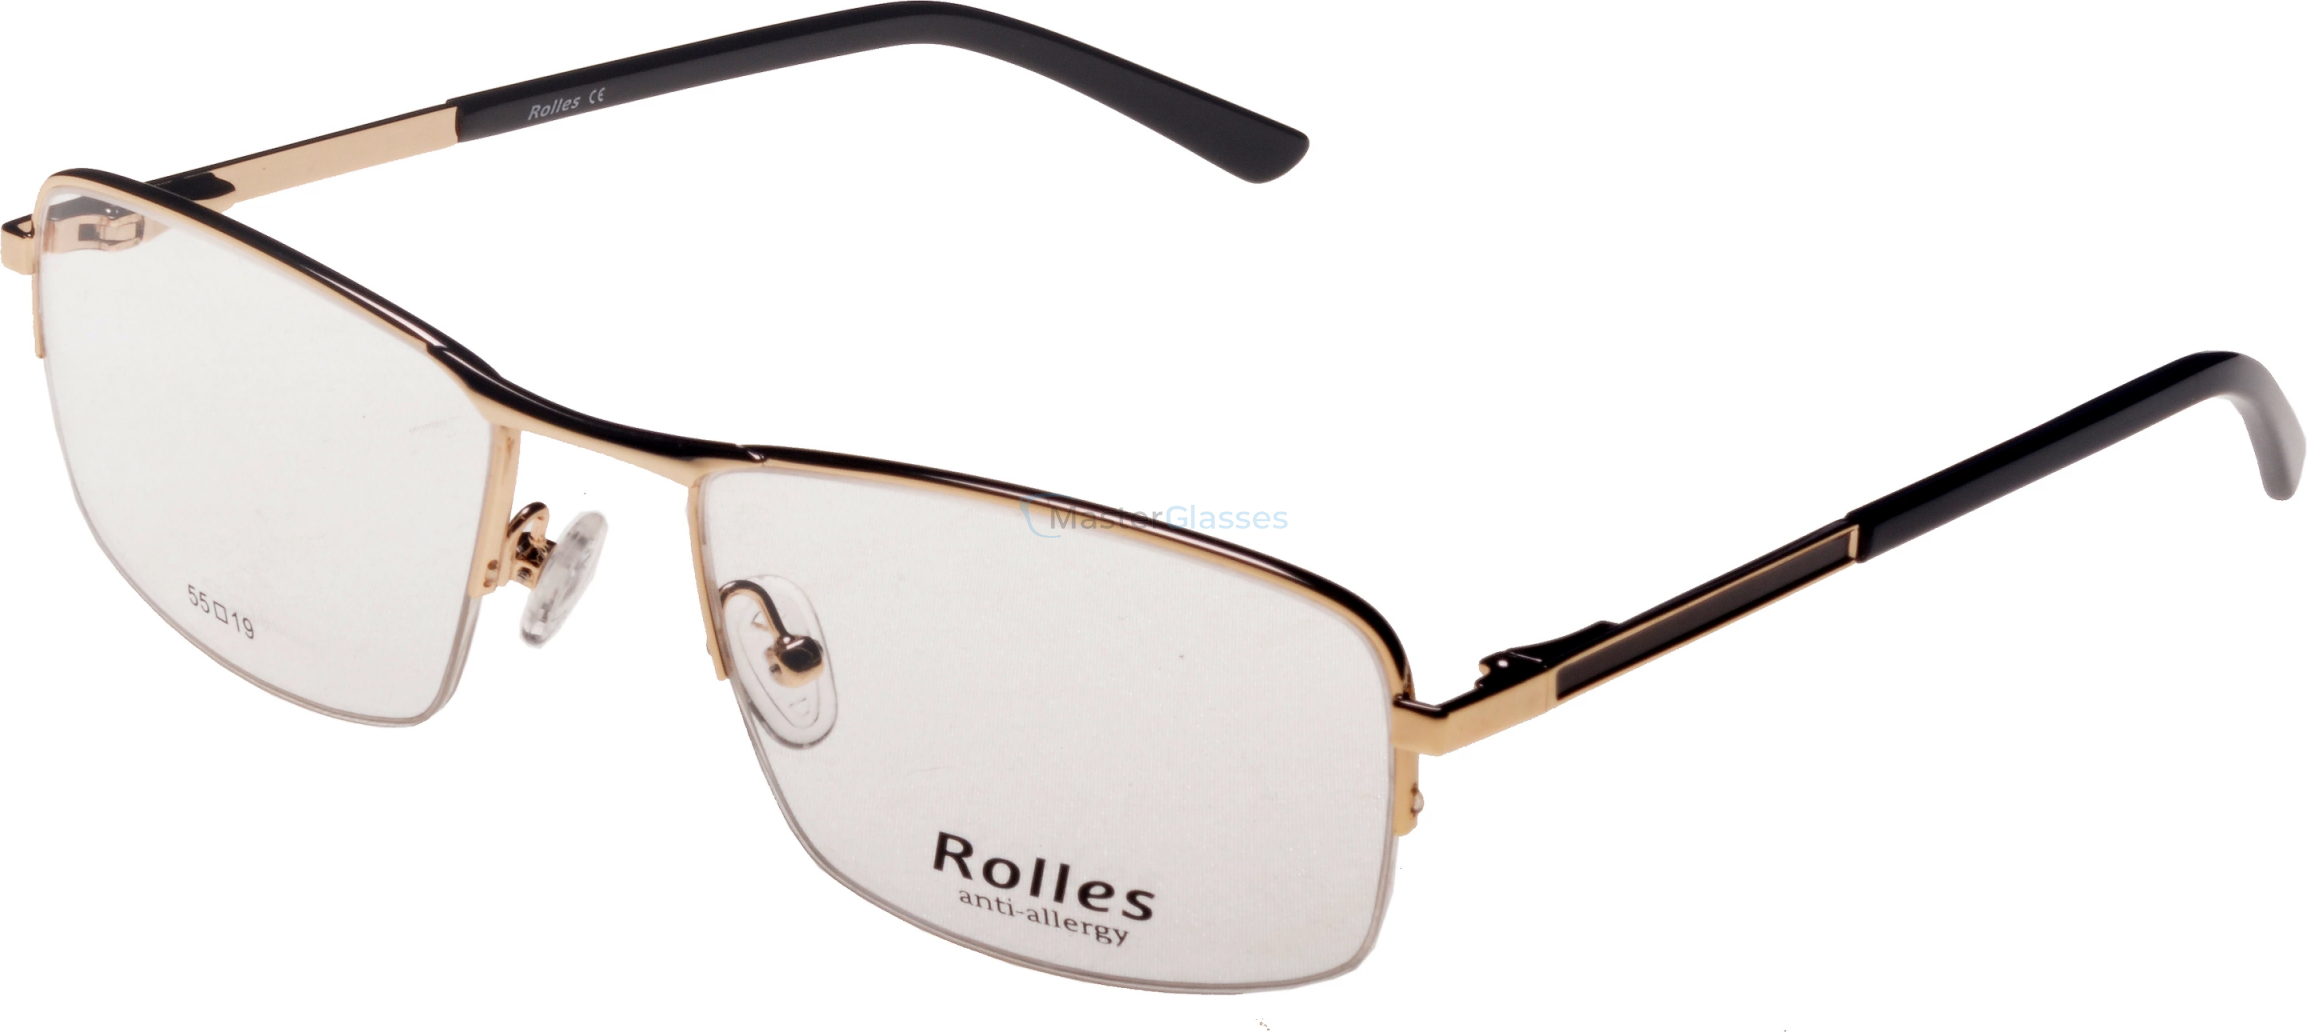  Rolles 678 01